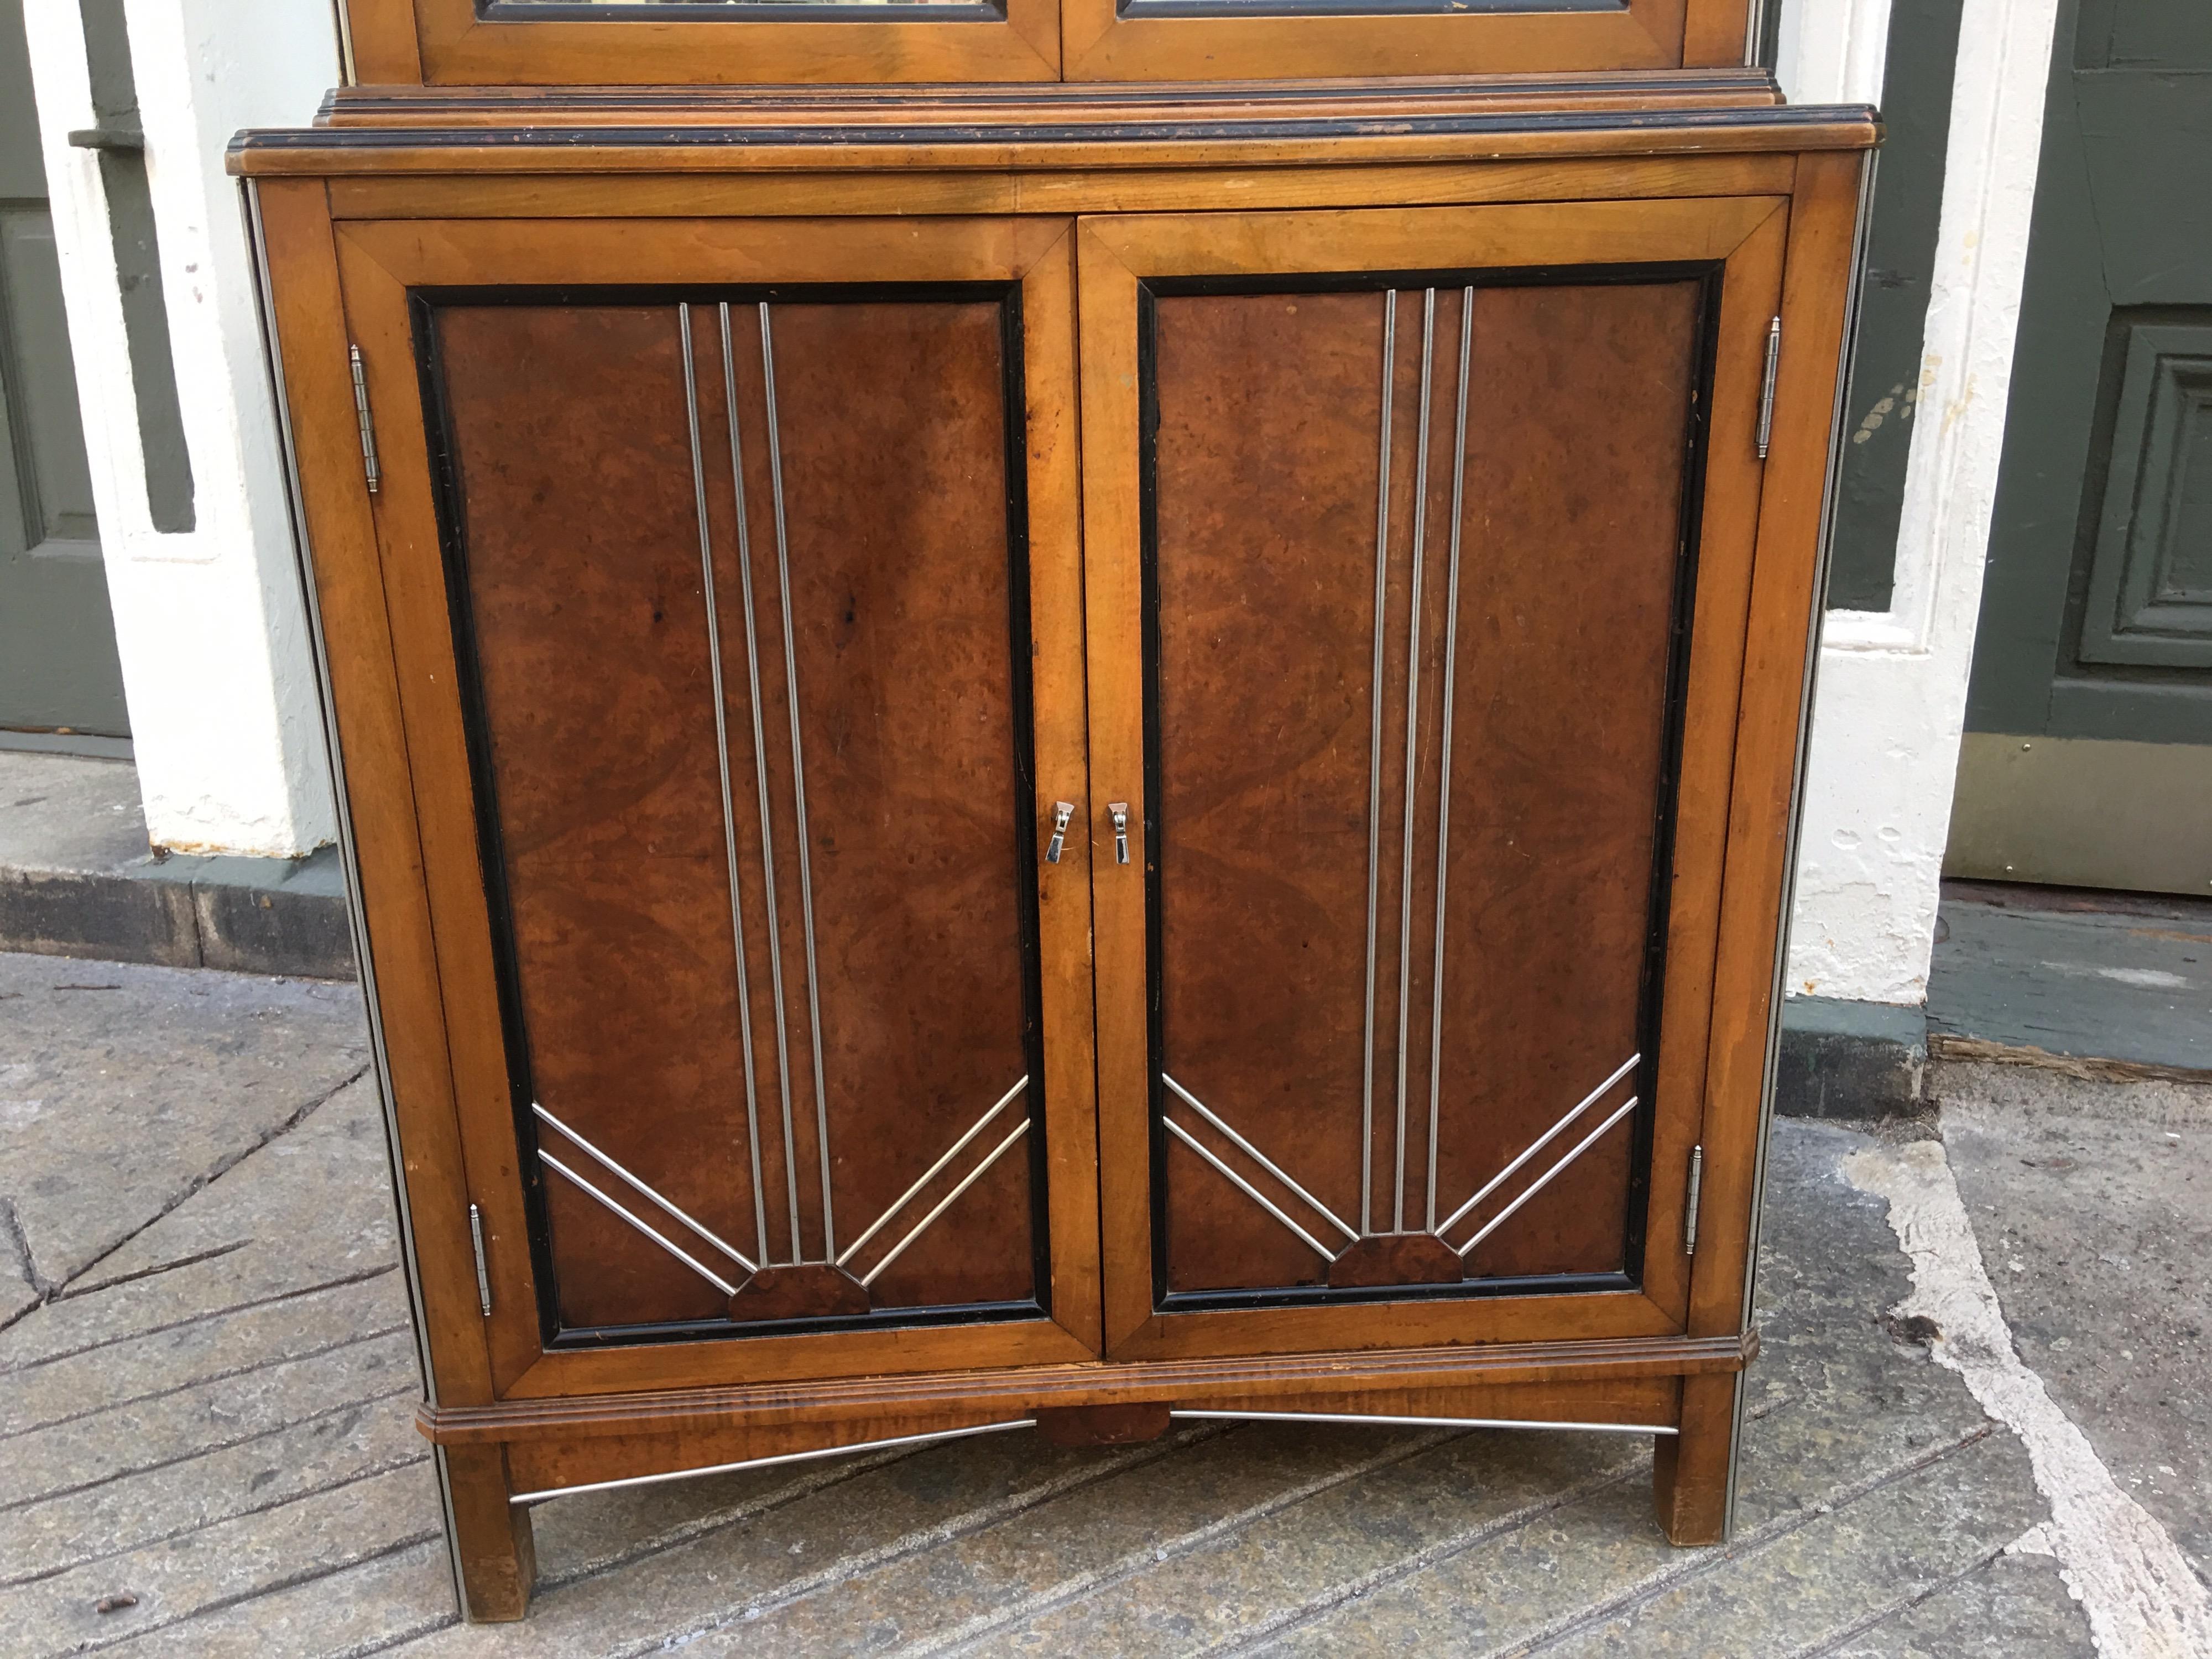 Very nice deco cabinet with mirrored top doors. Upper doors open to reveal two shelves. Lower doors are decked out with chrome trim and painted triangles. Very nice original condition. Perfect size for bathrooms, kitchens or compact spaces.